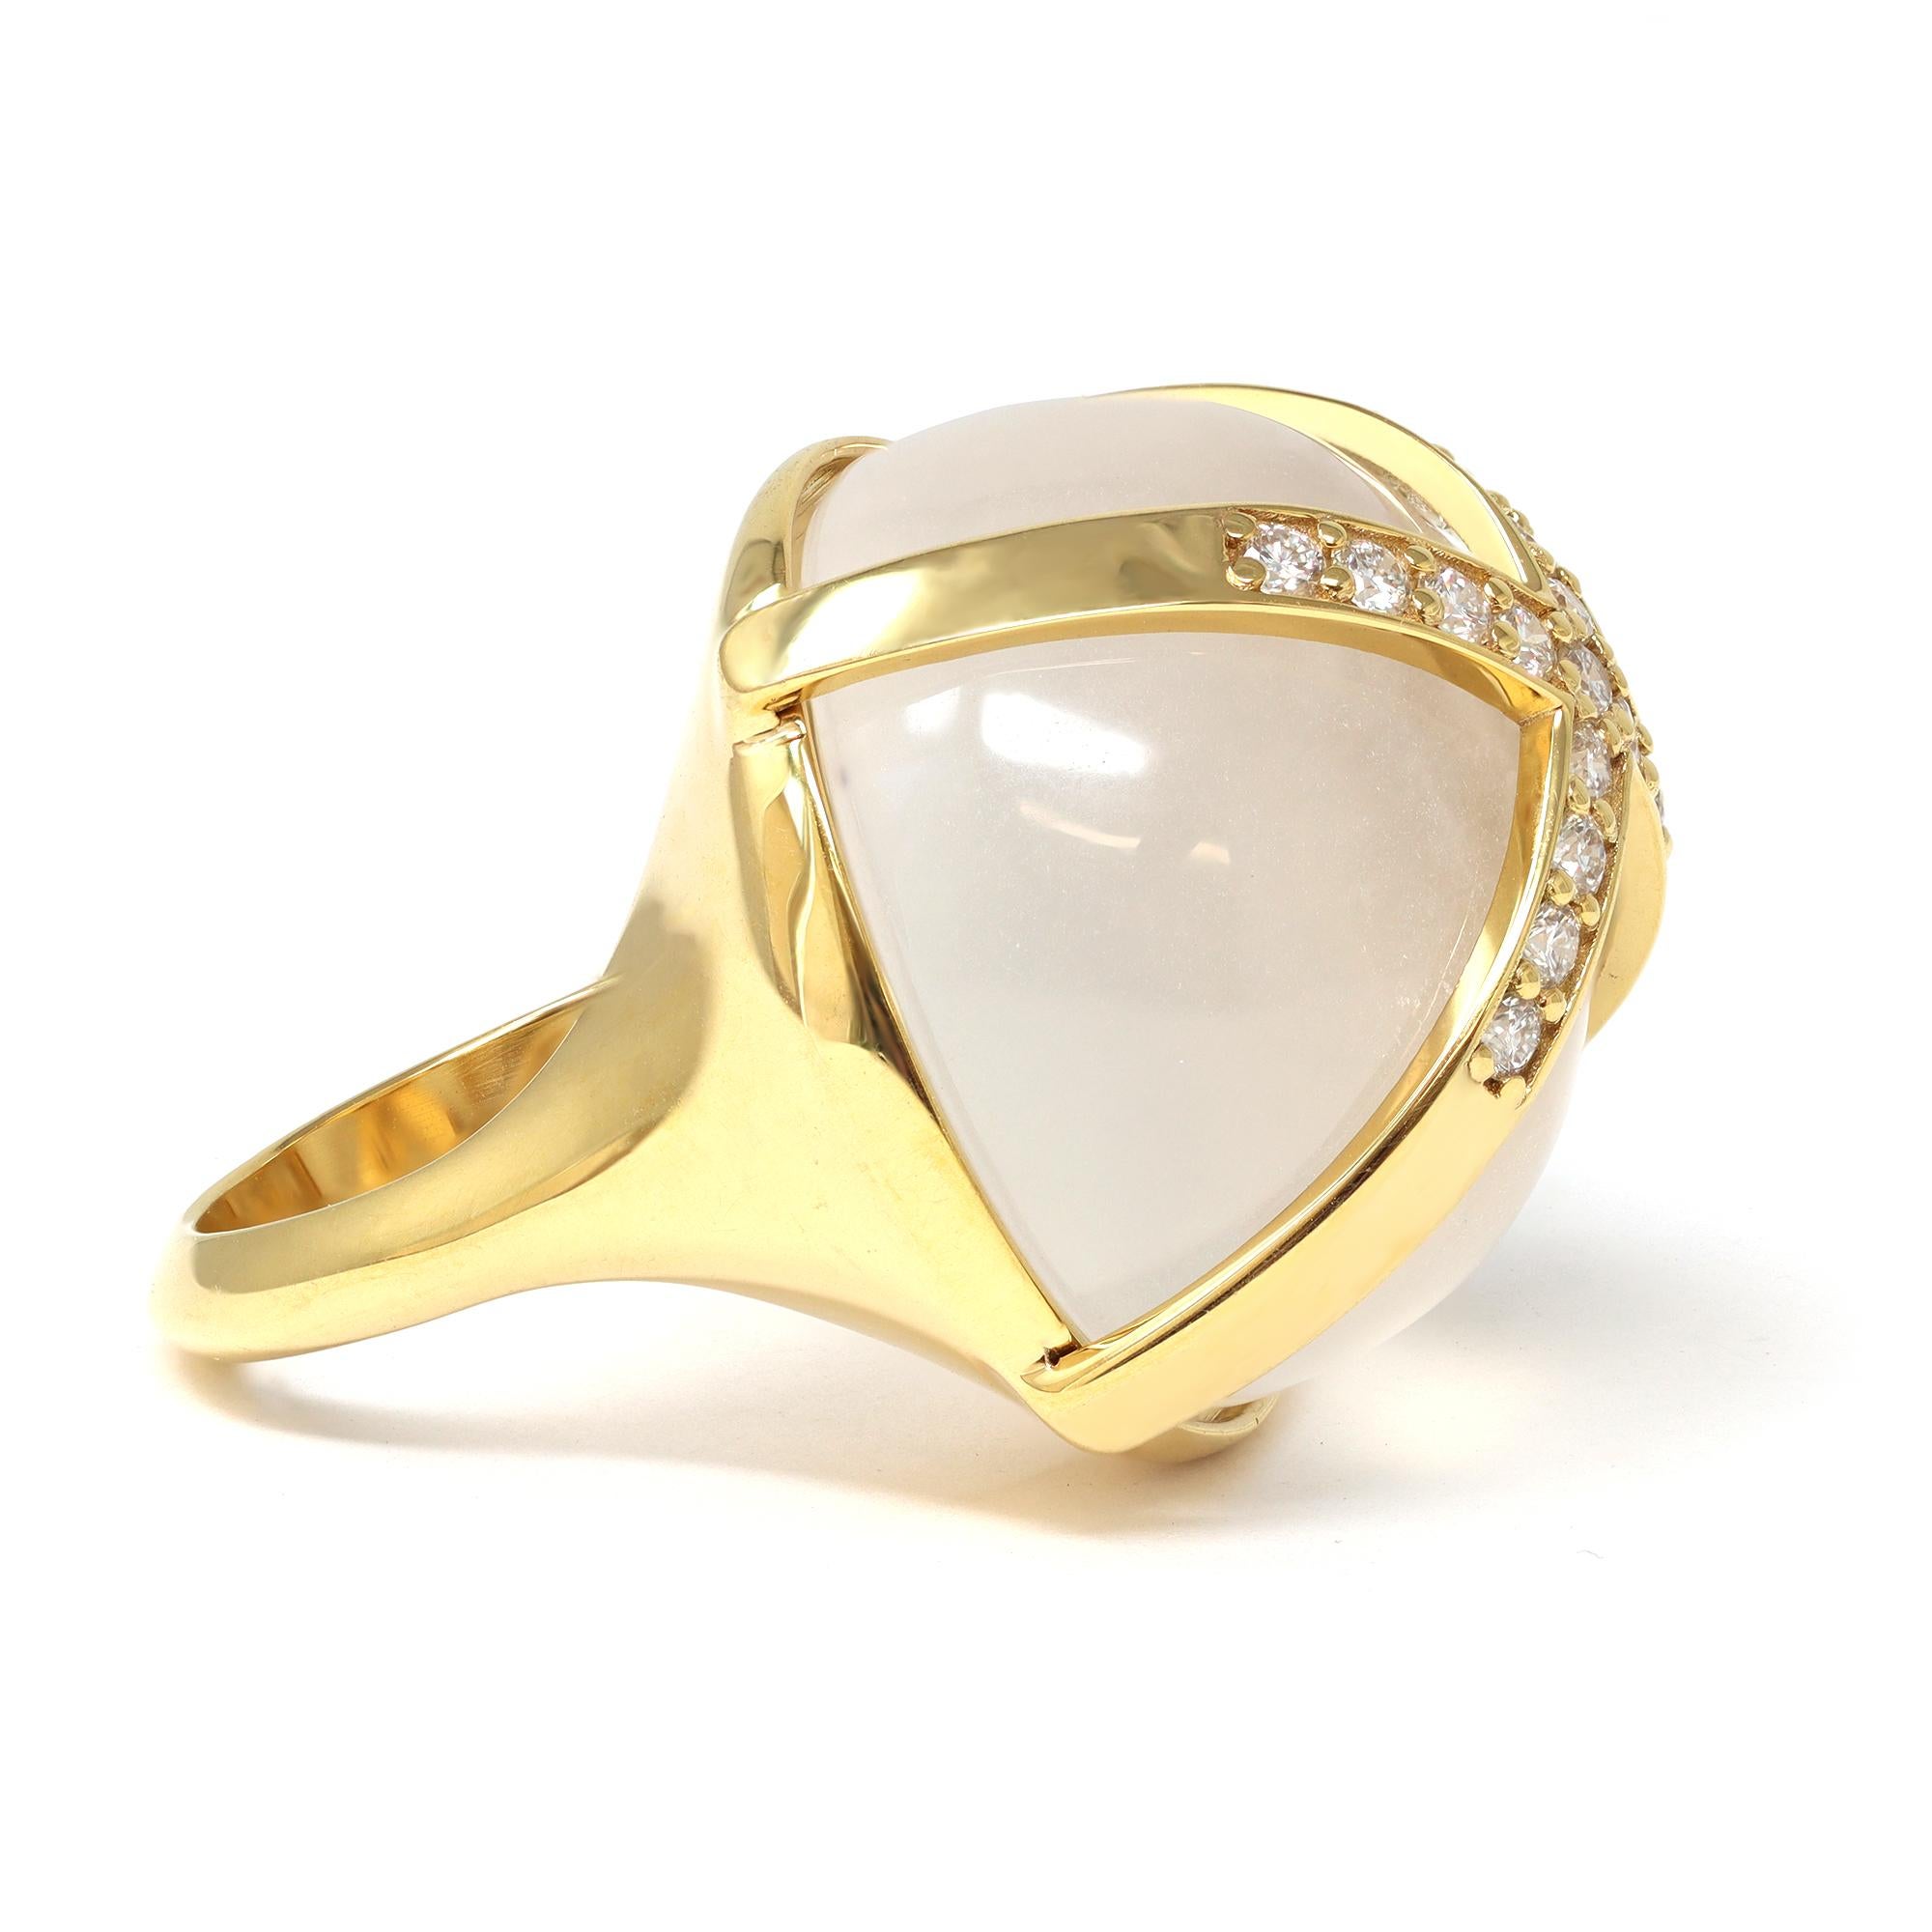 A unique statement-like cocktail ring created by Rosaria Varra featuring a natural translucent Jadeite jade Cabochon AKA Ice Jade. The jade is caged by a crisscross gold and diamond design. The Jadeite is natural with no indication of treatment. The